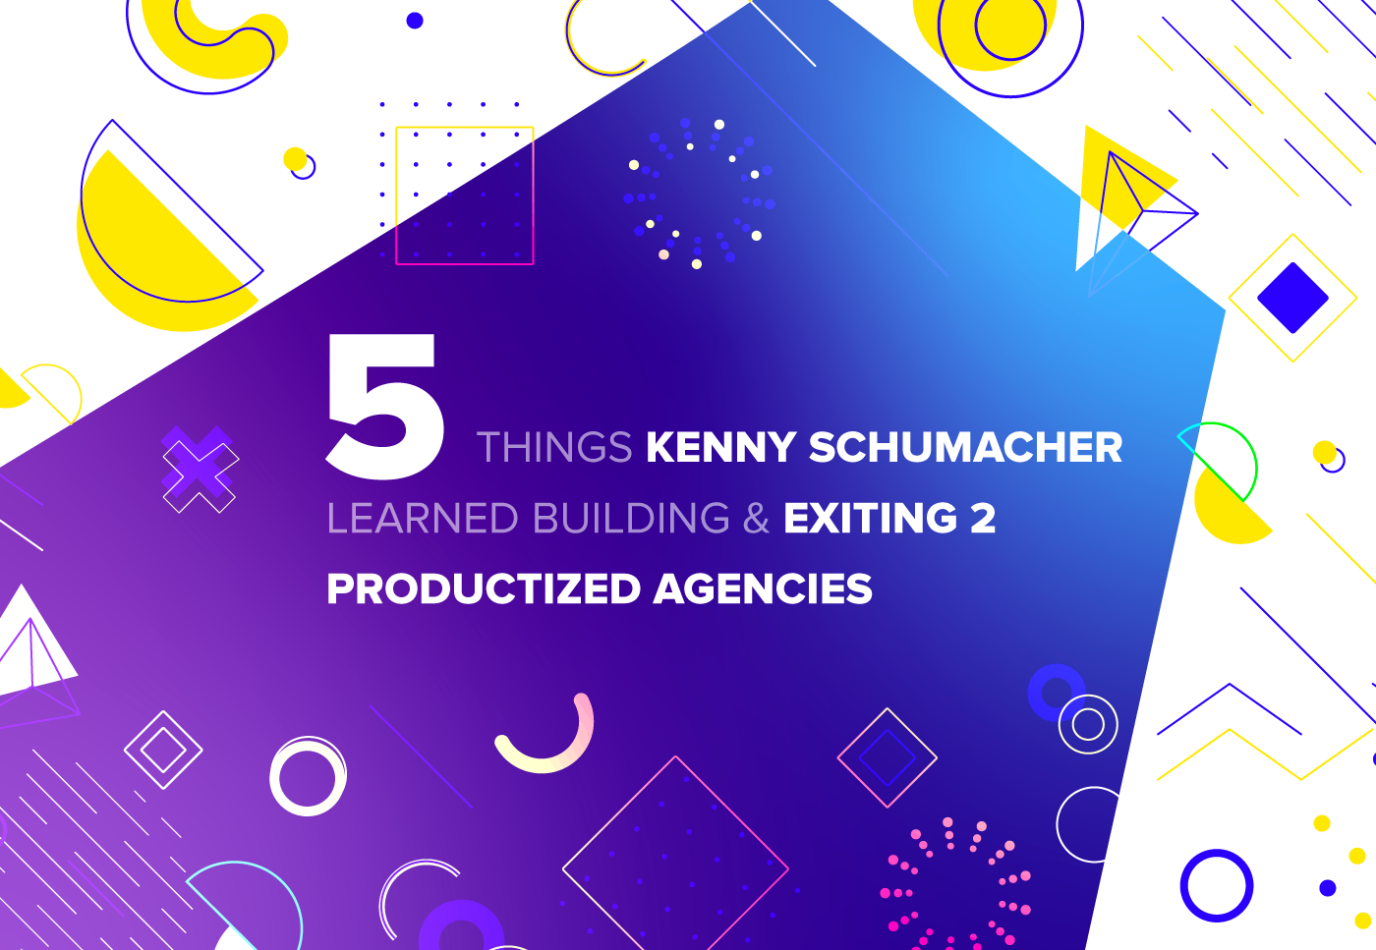 Things Kenny Schumacher Learned Building & Exiting 2 Productized Agencies